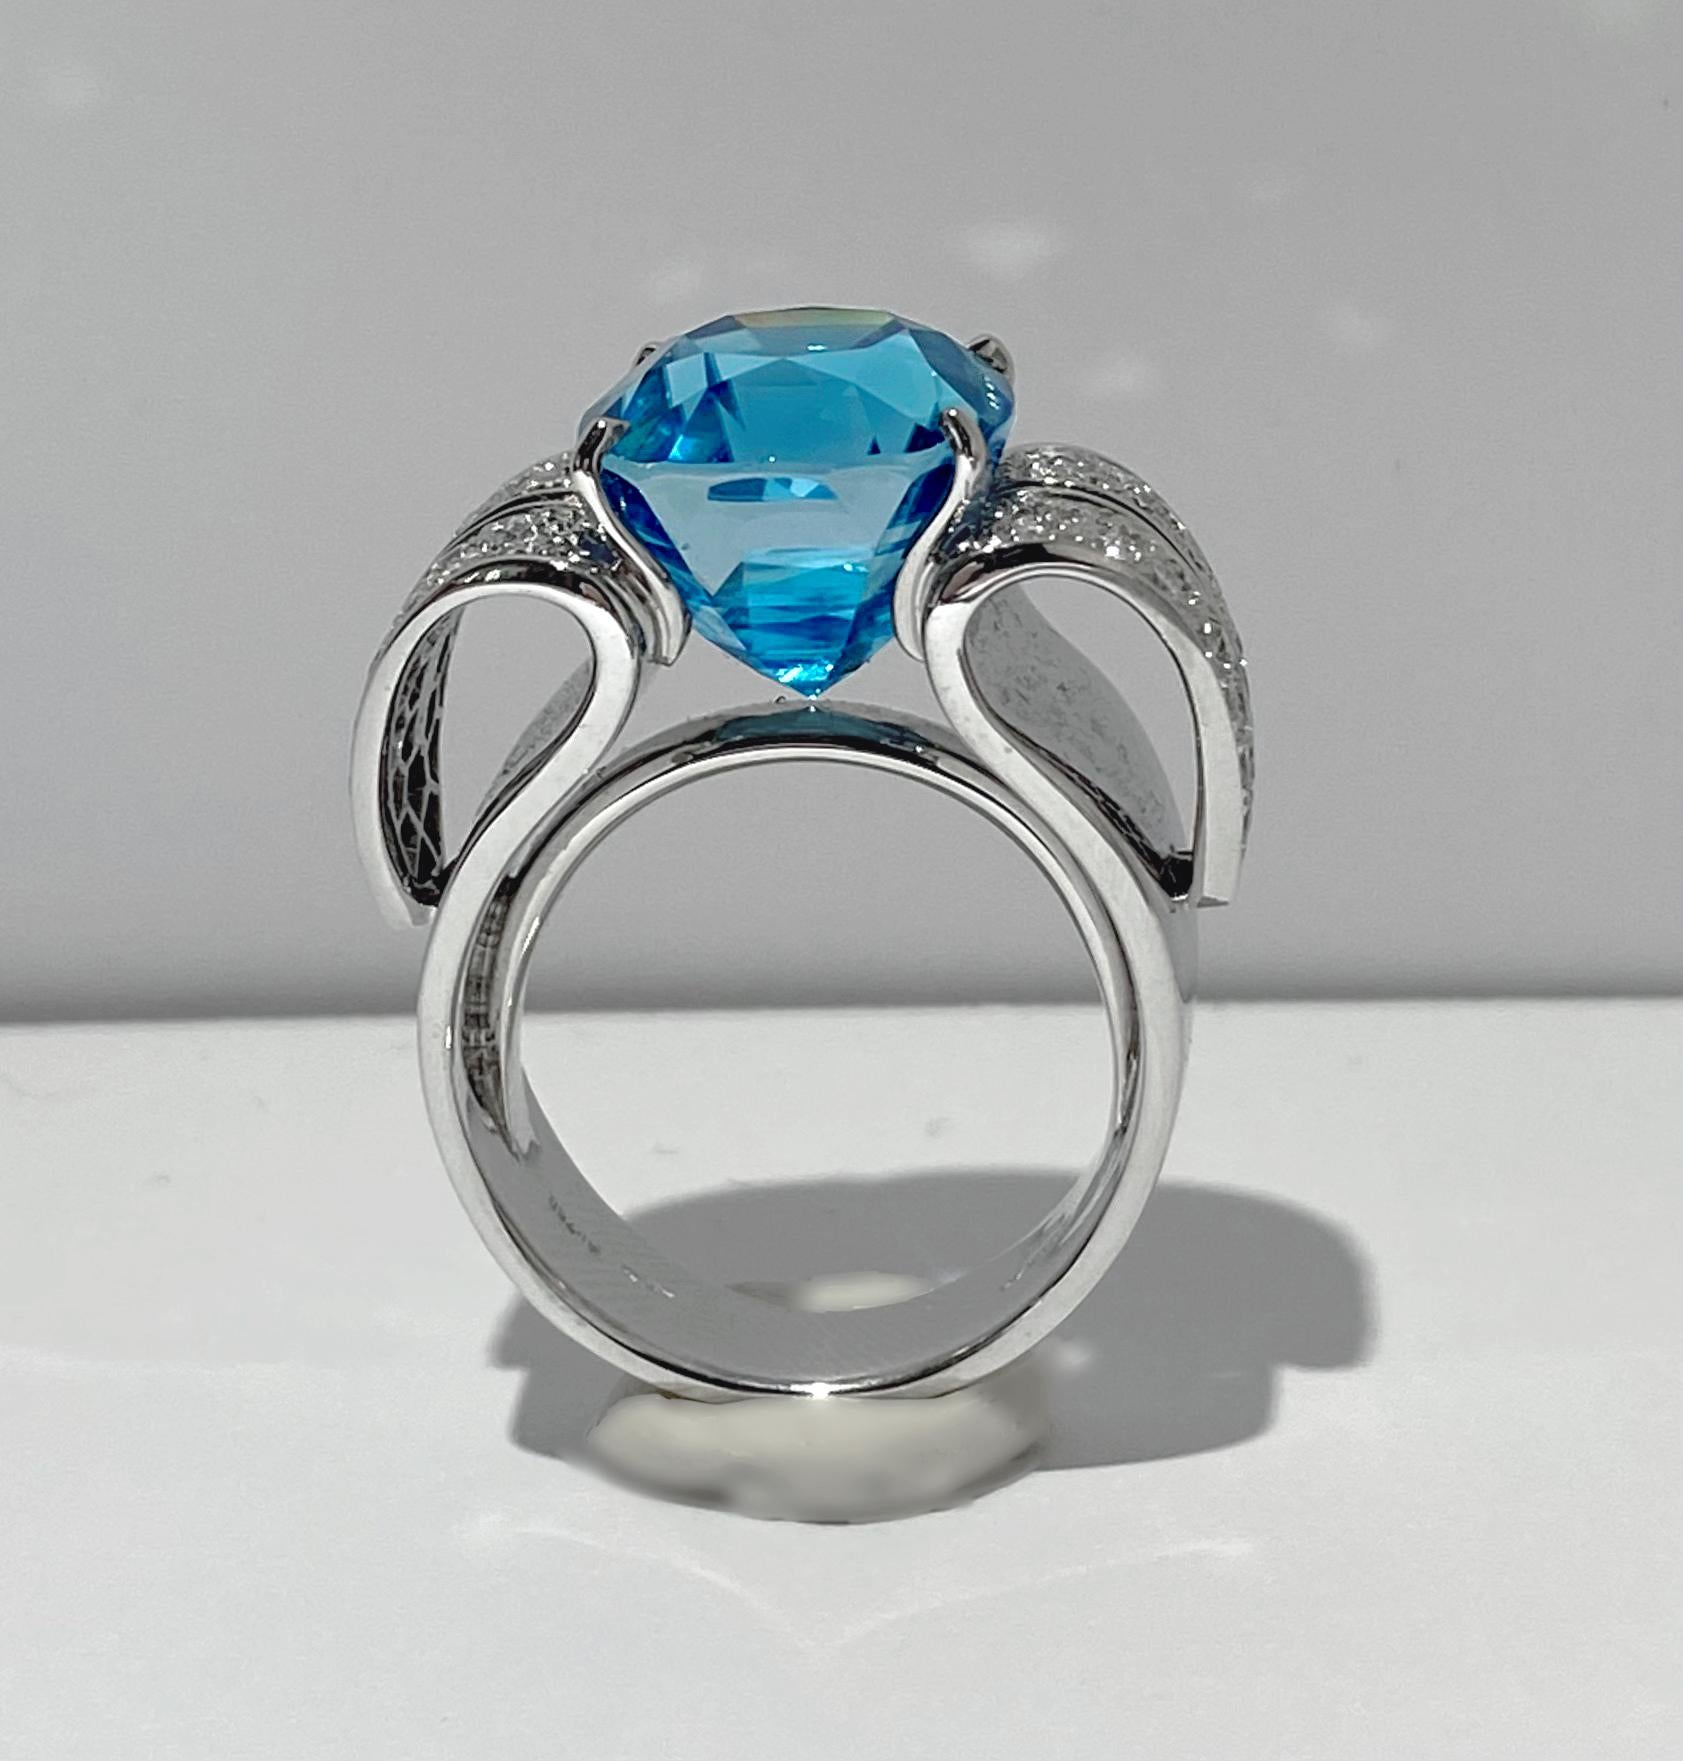 Nature's tender embrace is elegantly embodied in this exquisite ring crafted by the master Italian jeweler, Scavia. The captivating design features two pavé diamond petals delicately cradling a rare and breathtaking Light Blue Zircon weighing 3.29